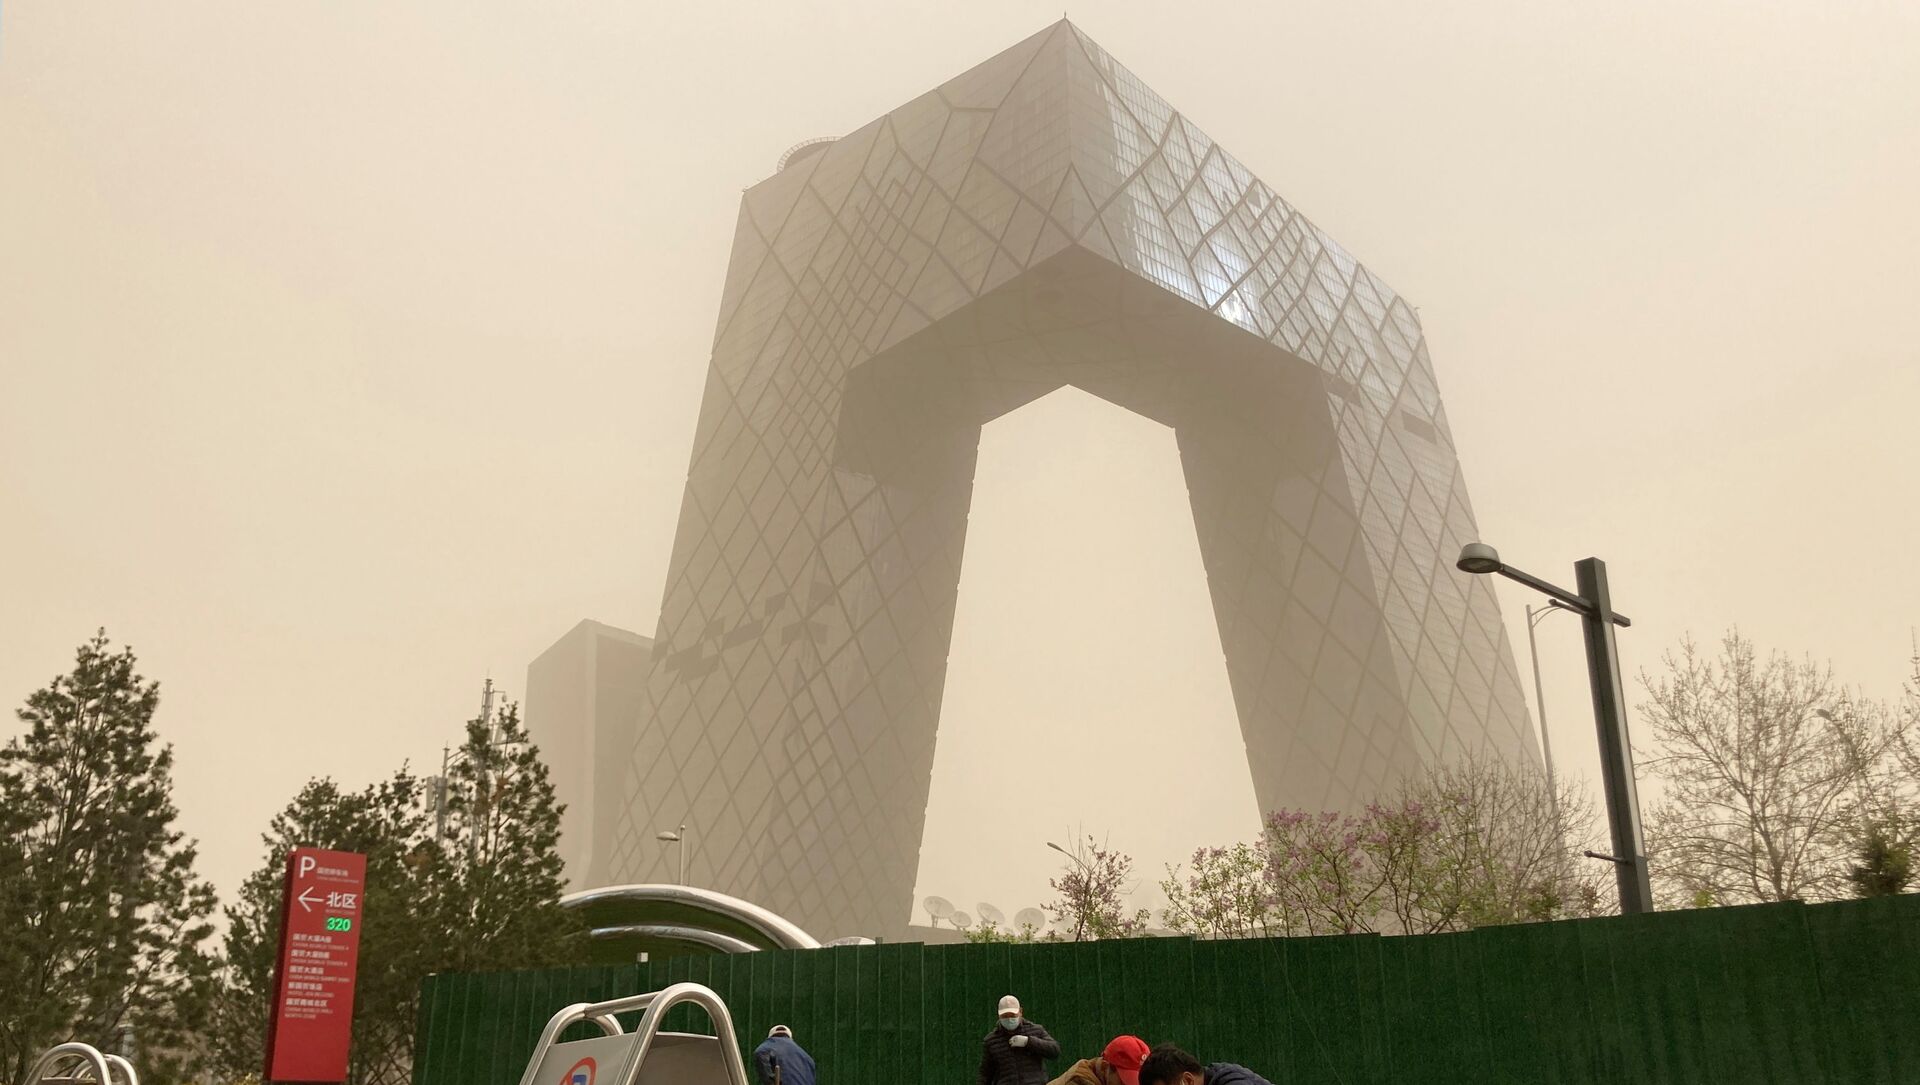 Construction workers are seen in front of the CCTV headquarters shrouded in dust as the city is hit by a sandstorm, in Beijing, China March 28, 2021. - Sputnik International, 1920, 28.03.2021